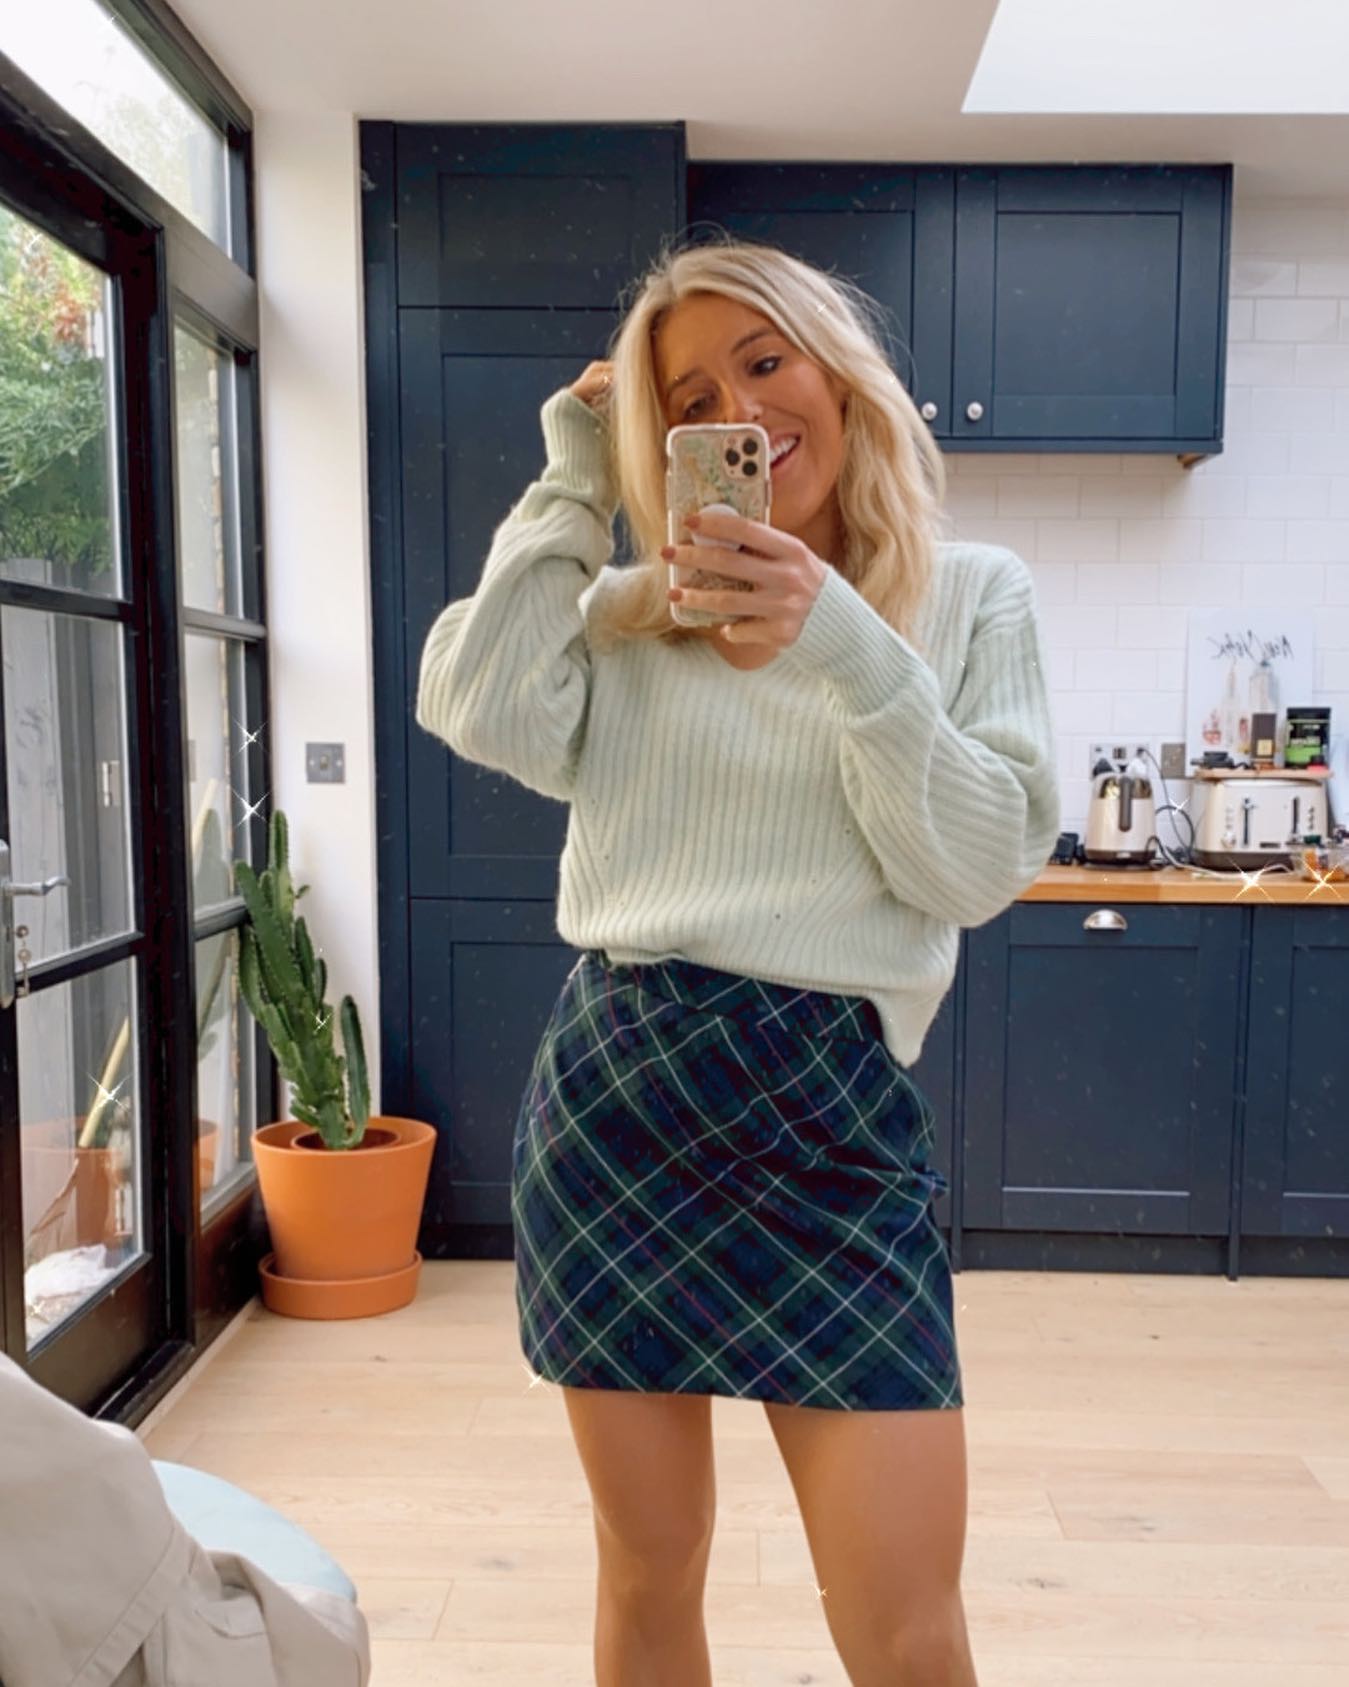 Dressing up to stay home @emshelx keeping it comfy but cute in our Derby Check Skirt 🖤